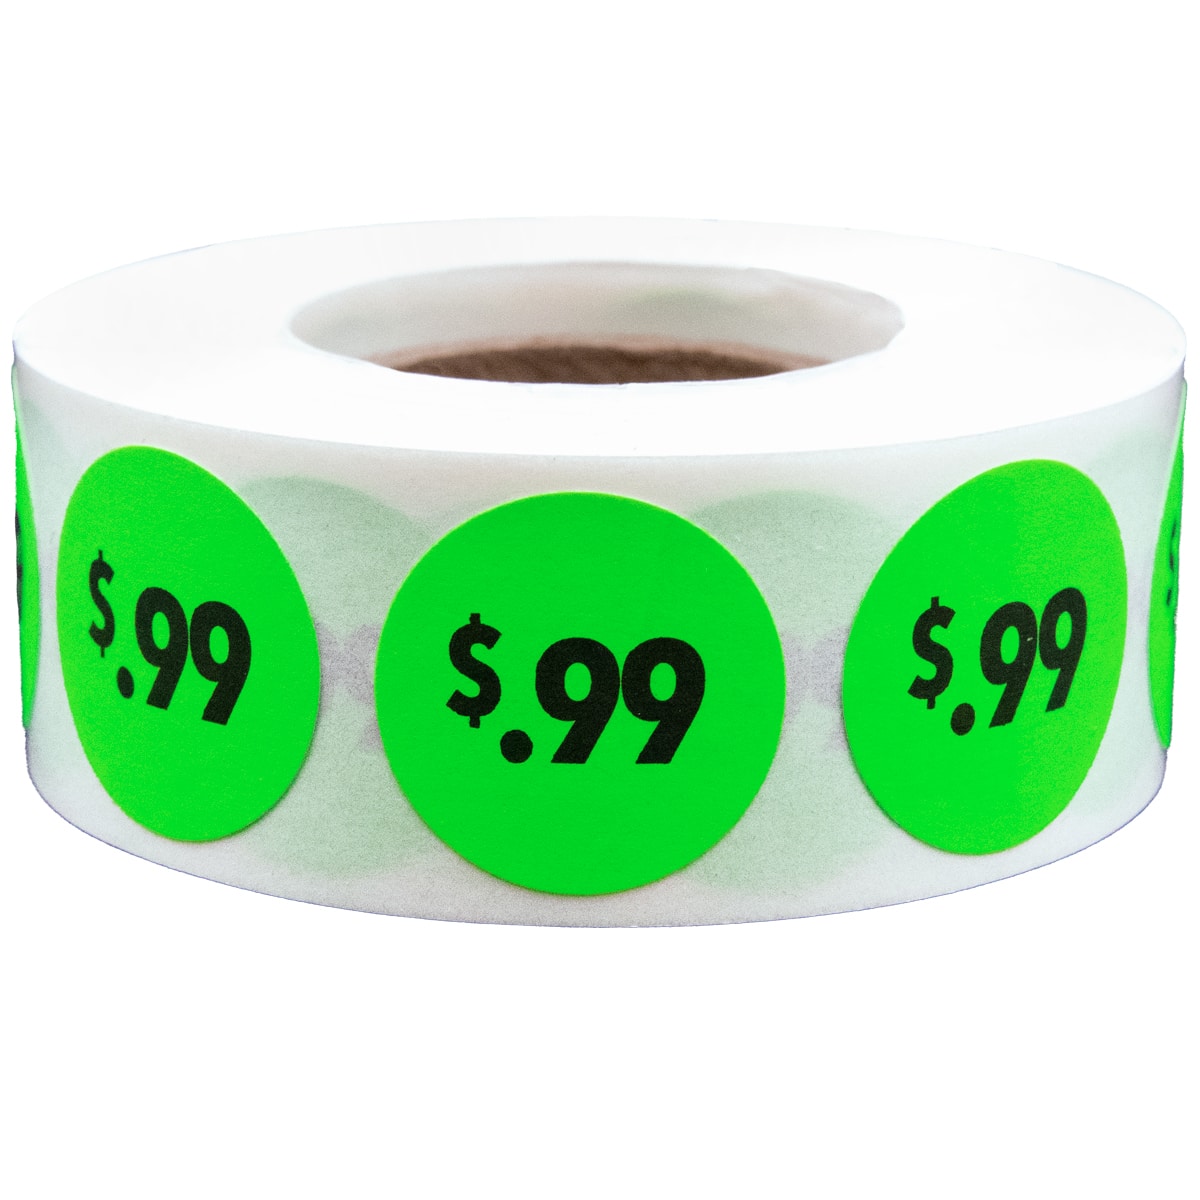  Sale Price Stickers, 1 Round Self Adhesive Retail Merchandise  Sale Labels, 500 Pack : Office Products